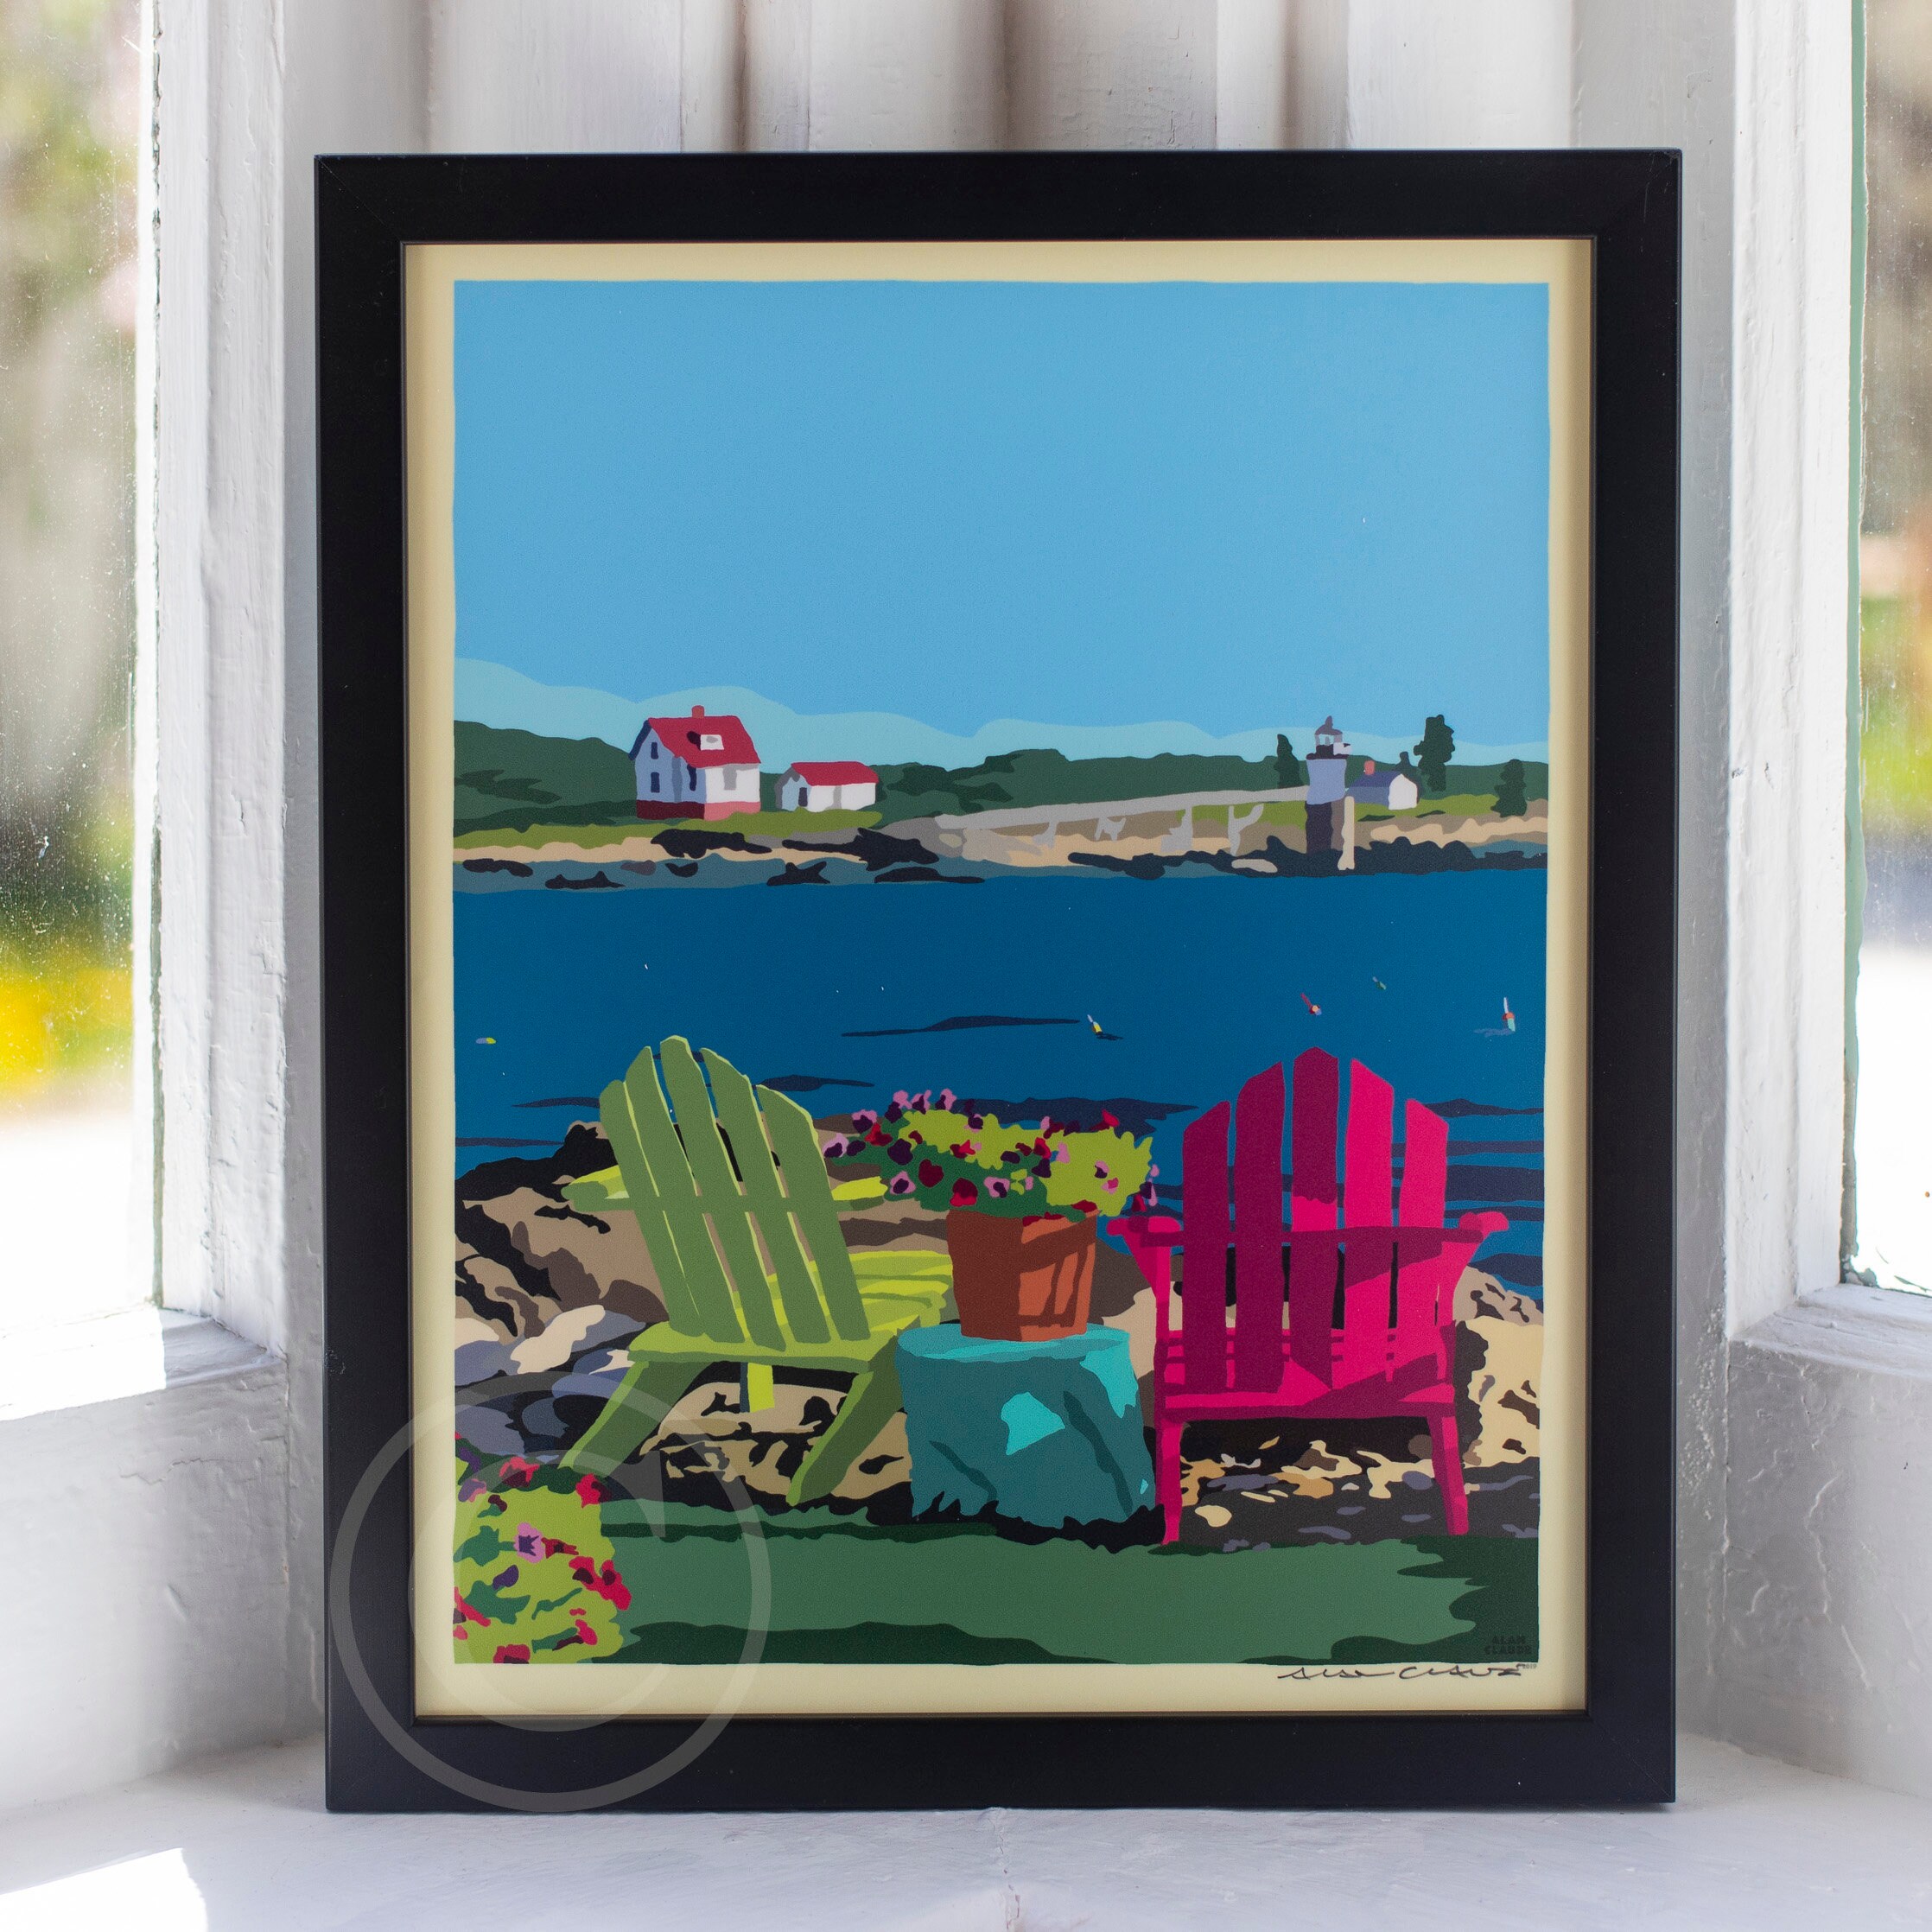 Chairs Over Looking Ram Island Framed Art Print 8 X 10 Wall Poster By Alan Claude - Maine"